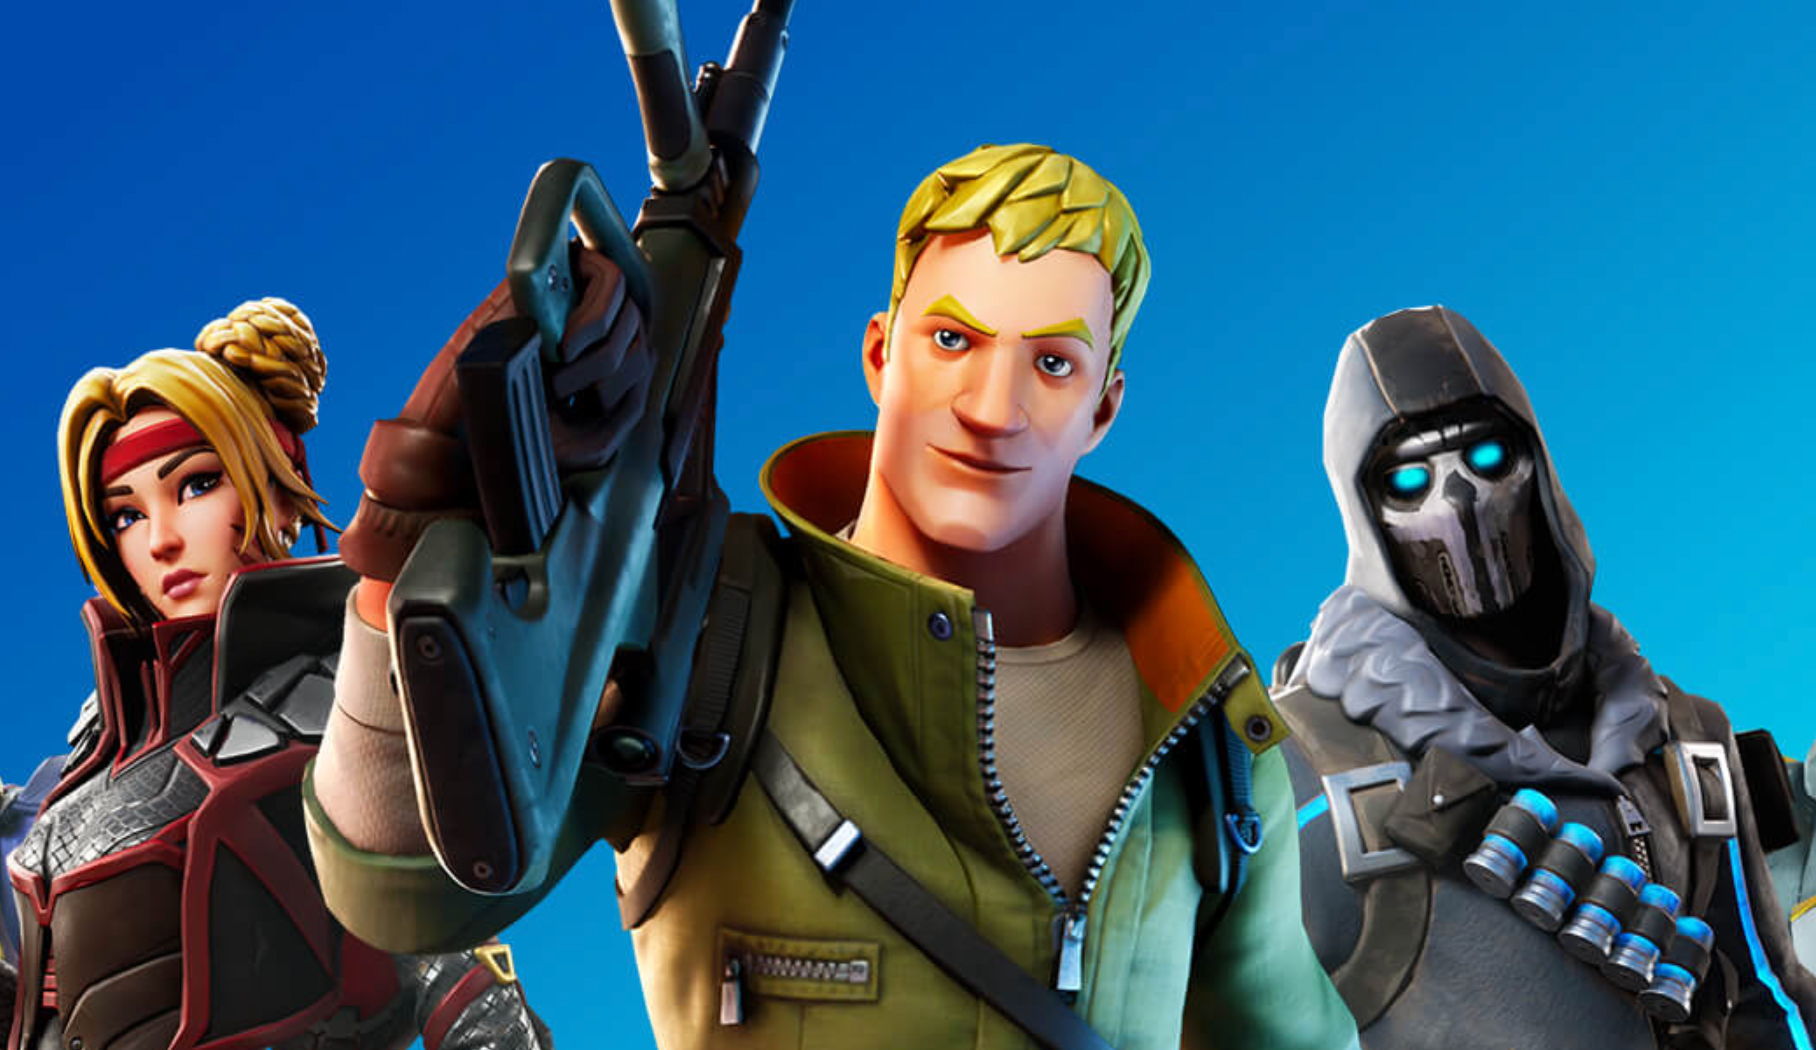 Google wins victory royale over Epic Games, snags Fortnite for